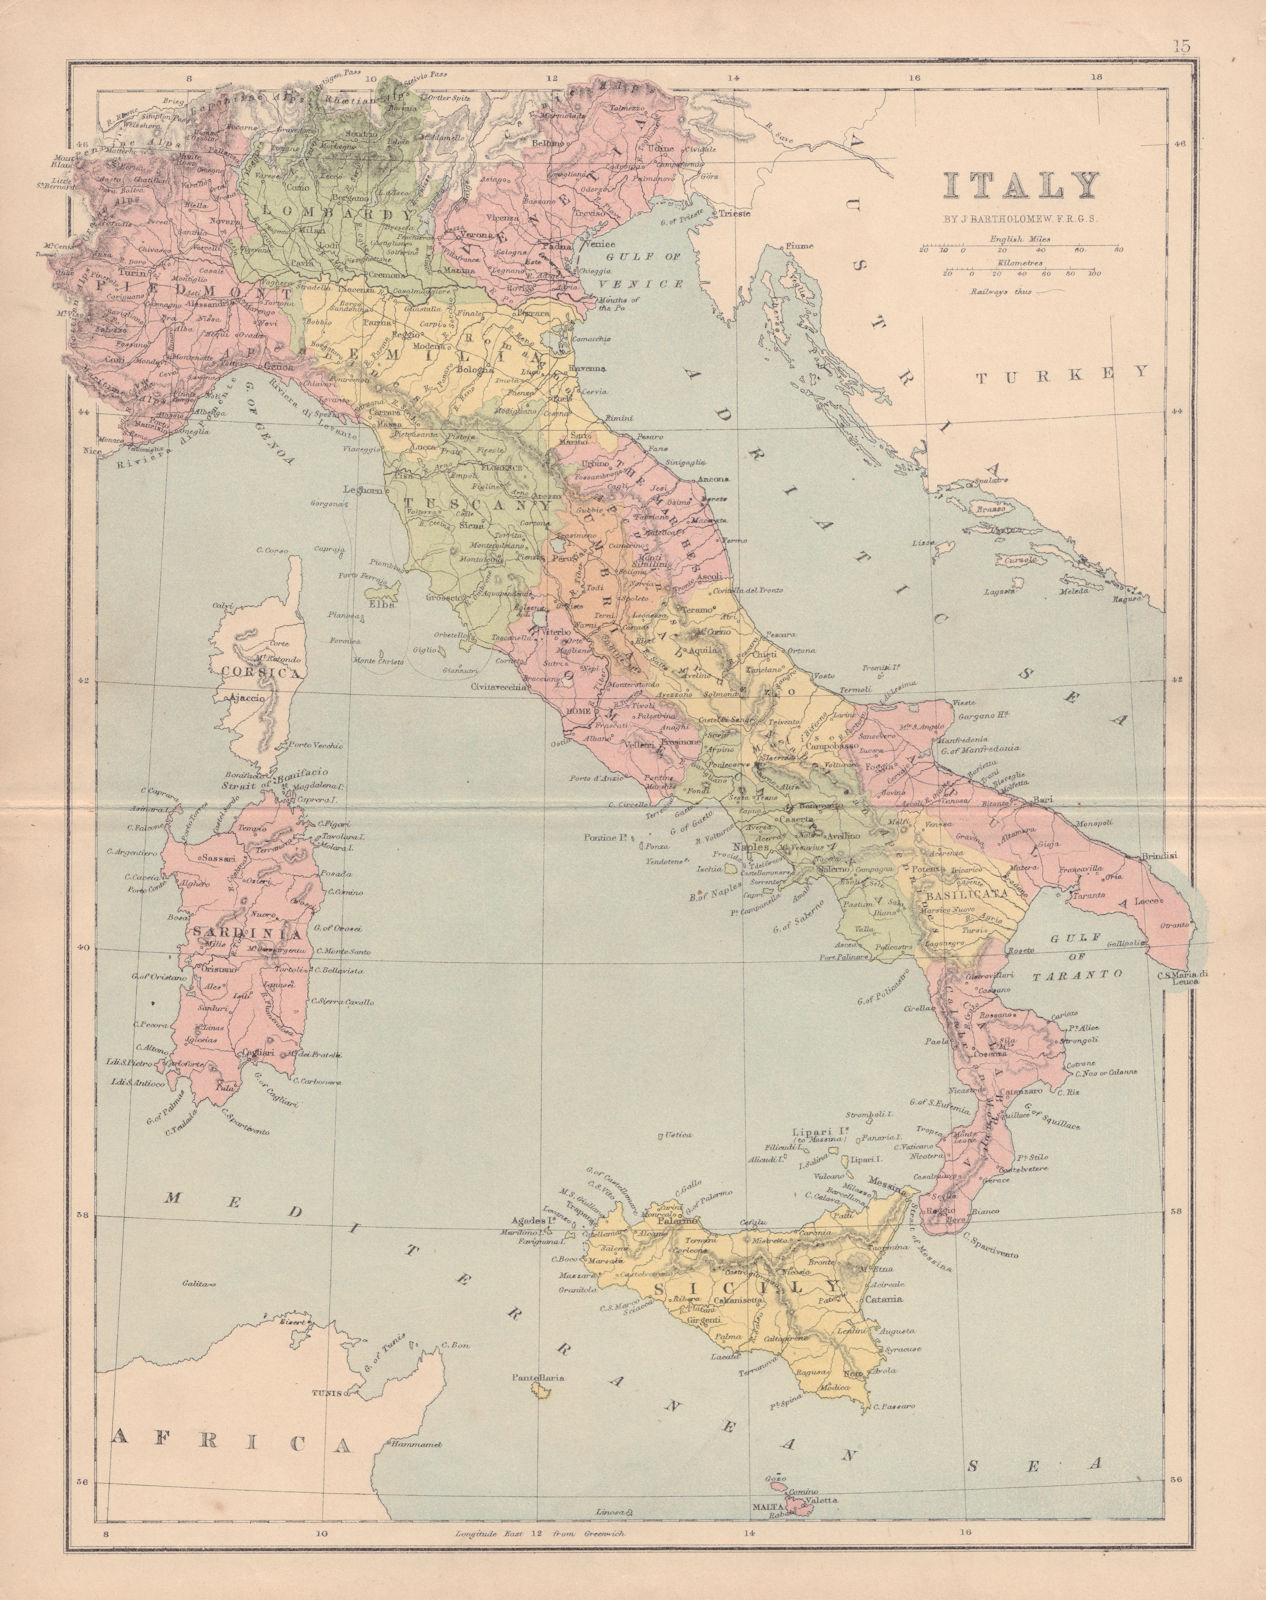 ITALY showing regions. Excludes Trieste/Istria & South Tyrol. COLLINS 1873 map